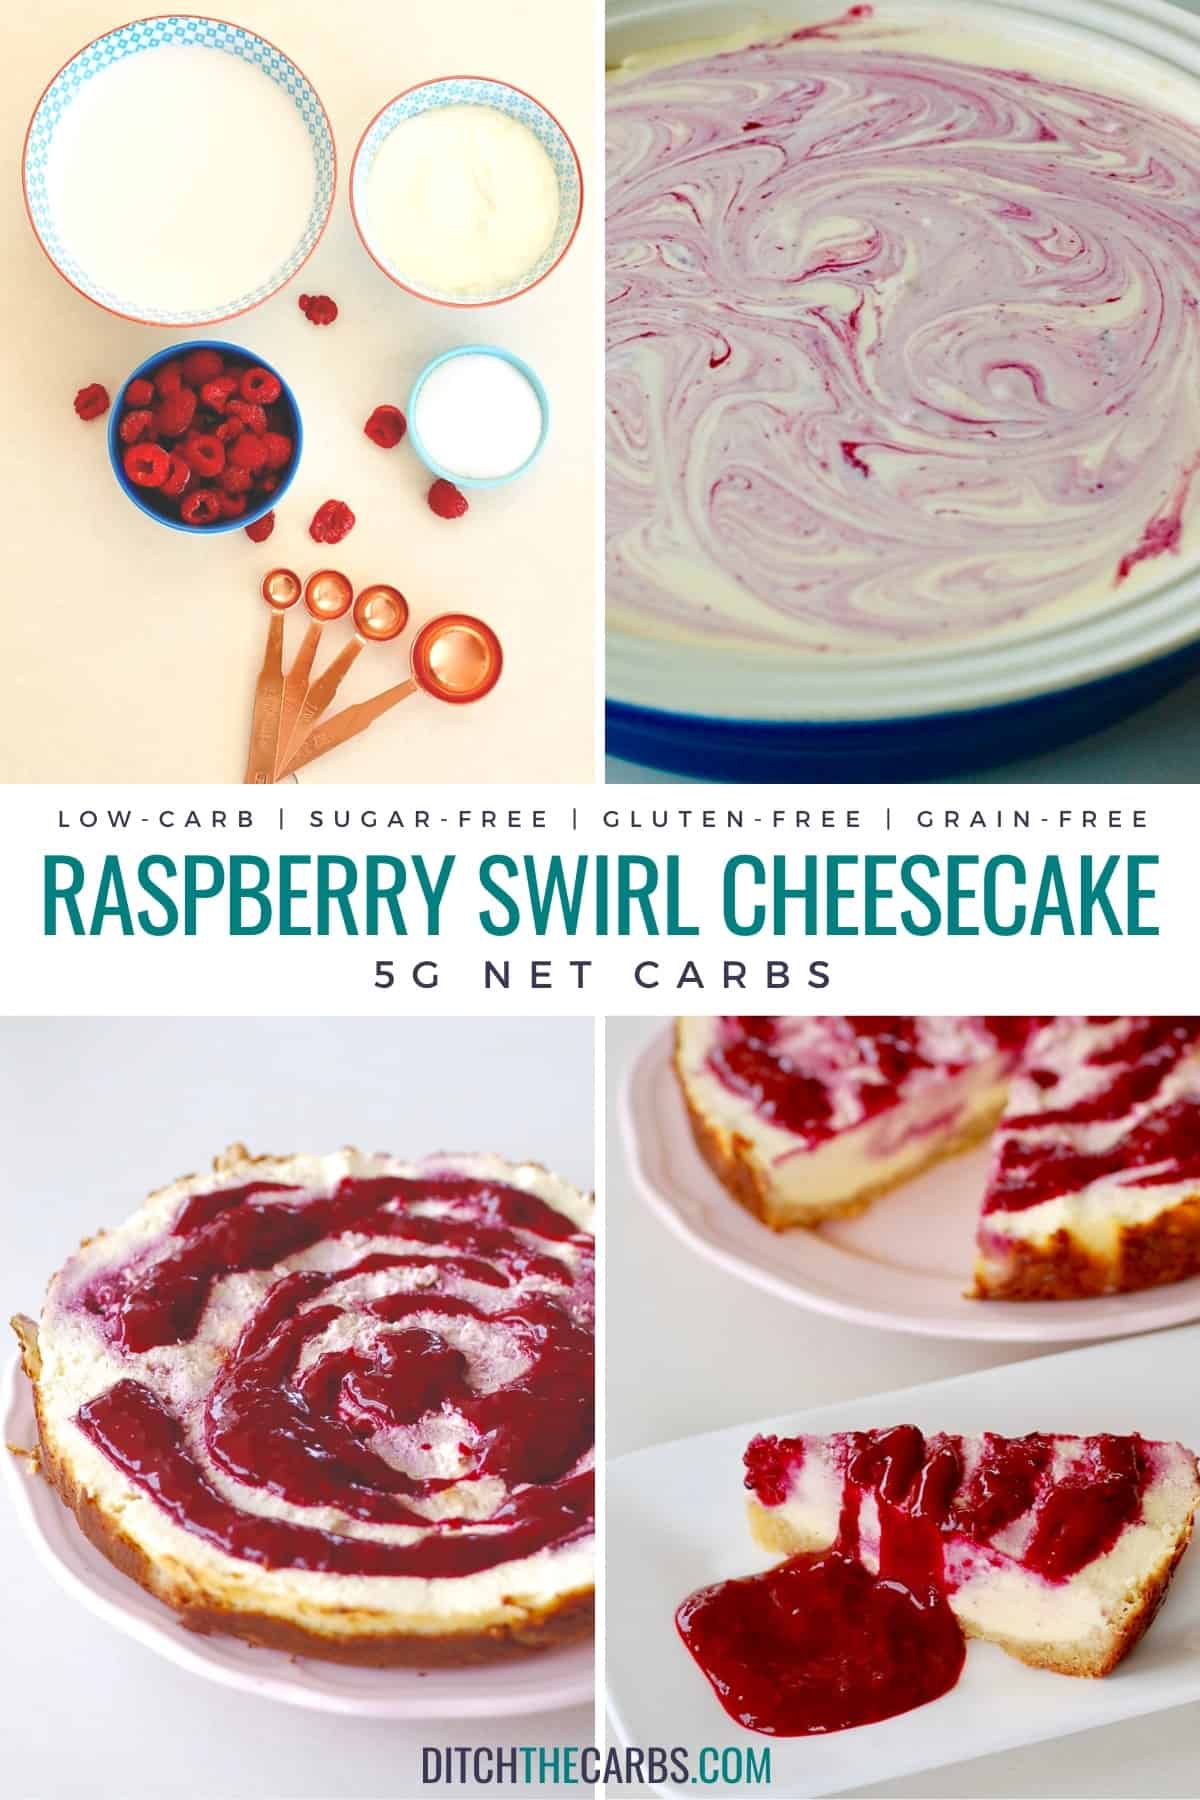 4 photos of the process from the ingredients to the final raspberry swirl cheesecake